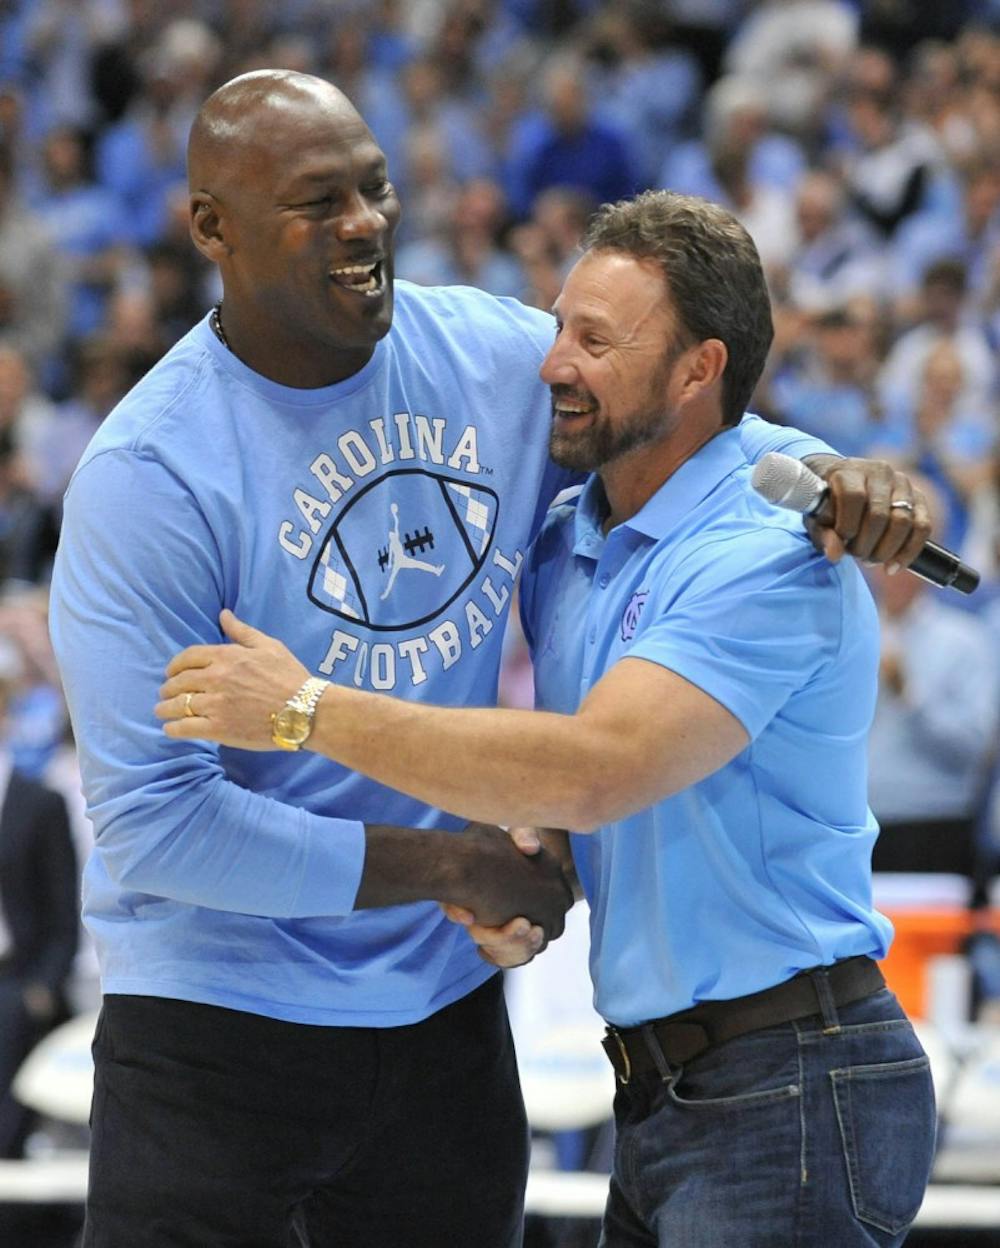 Former North Carolina basketball player and NBA Hall of Fame inductee Michael Jordan shakes hand with North Carolina football coach Larry Fedora at halftime of Saturday night's game. Jordan made an appearance to announce a new partnership between the Jordan brand and the North&nbsp;Carolina football team starting in the 2017 season.